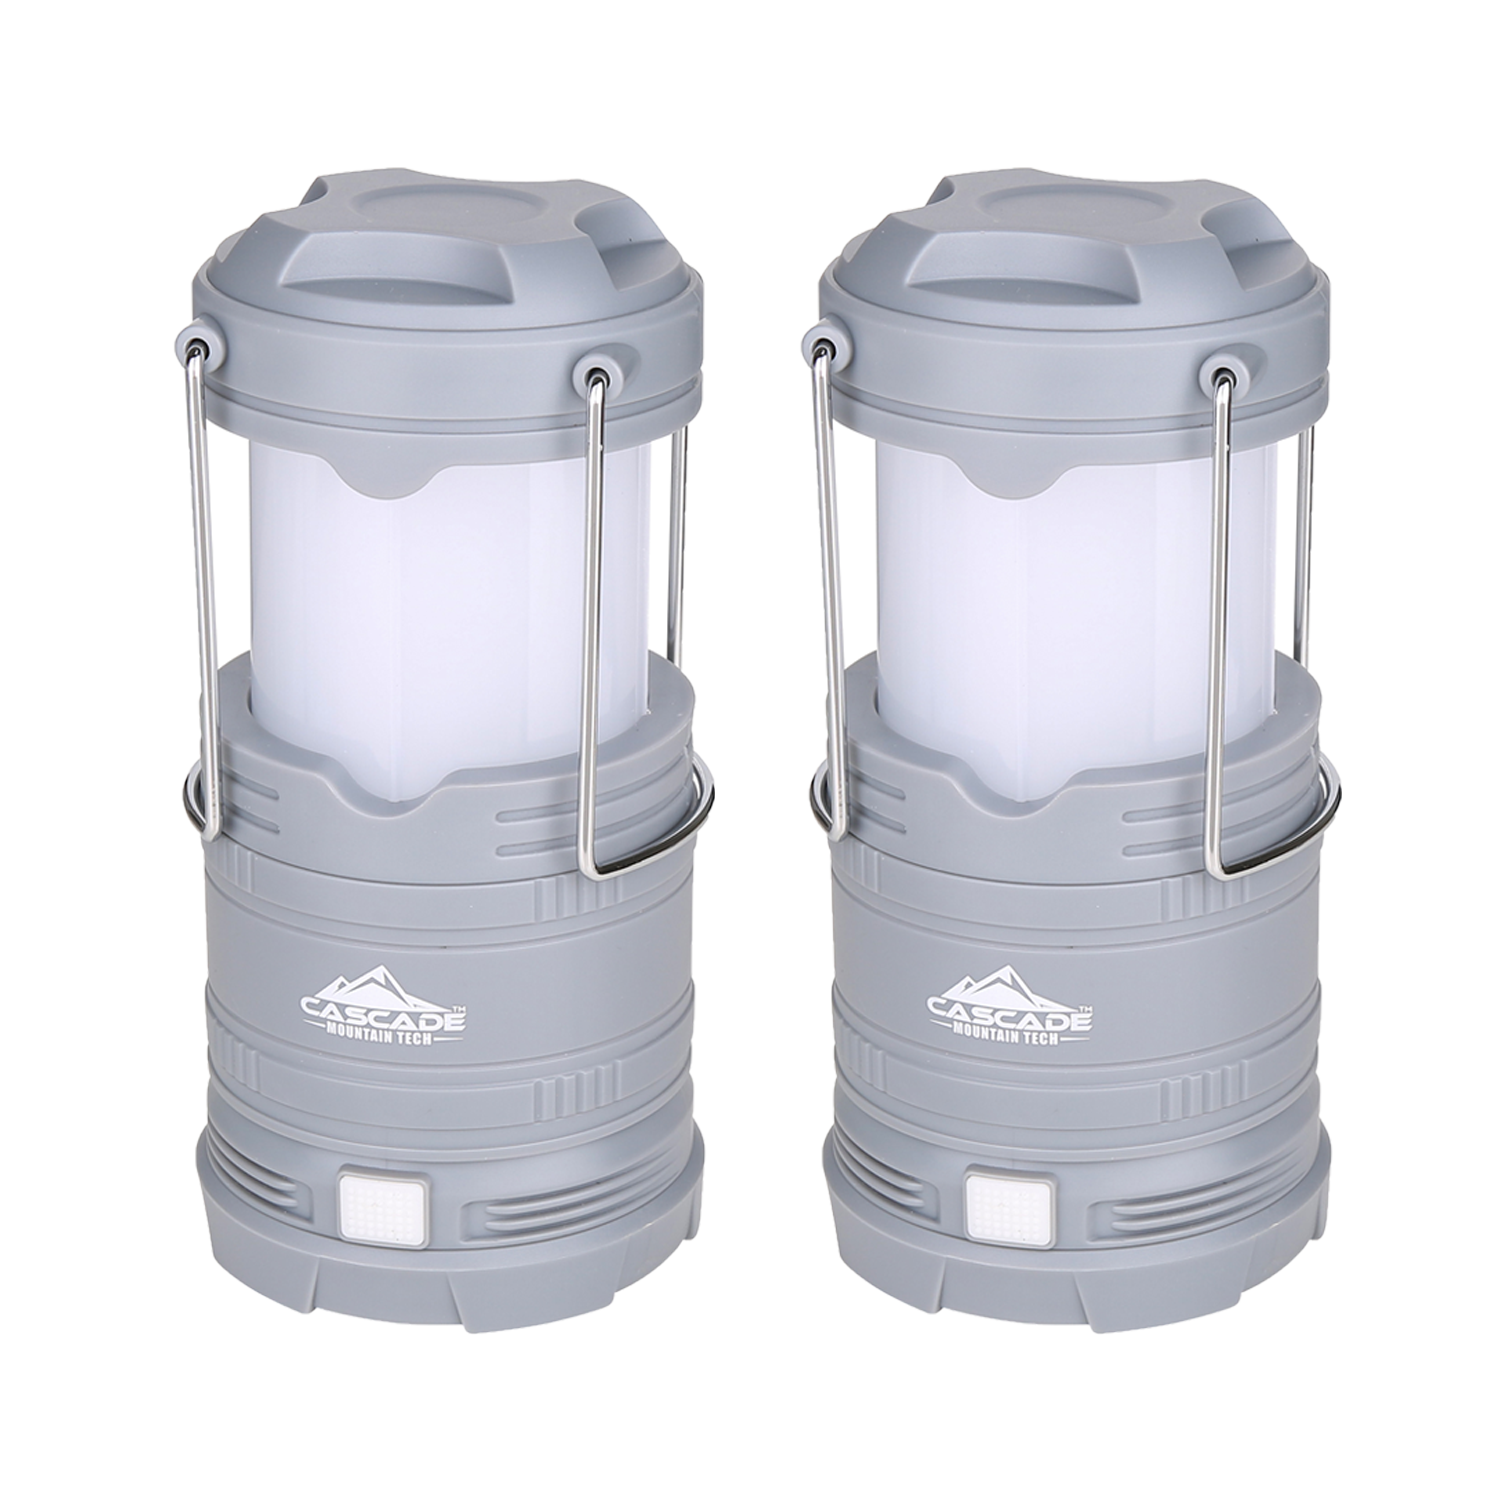 Cascade Mountain Tech Collapsible LED Lantern, Perfect Lighting for Camping,  BBQ's and Emergency Light - 3 Pack